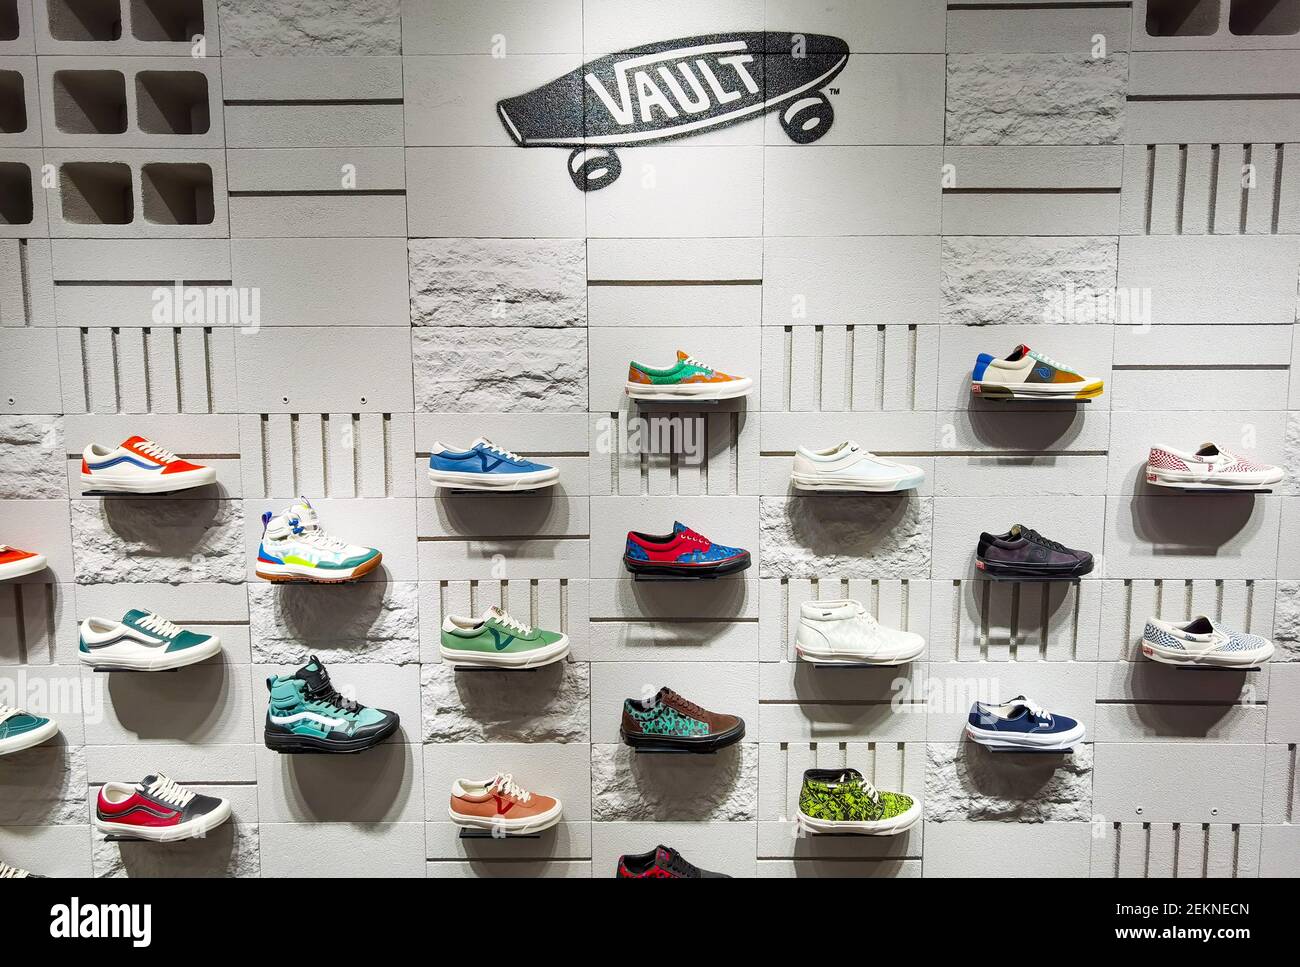 Consumers and Vans fans shop in Vans Huai-Hi, in Shanghai, China, 27  September 2020. This is Vans' first Asia Boutique, after London and New  York. A Vans boutique is a top-level store